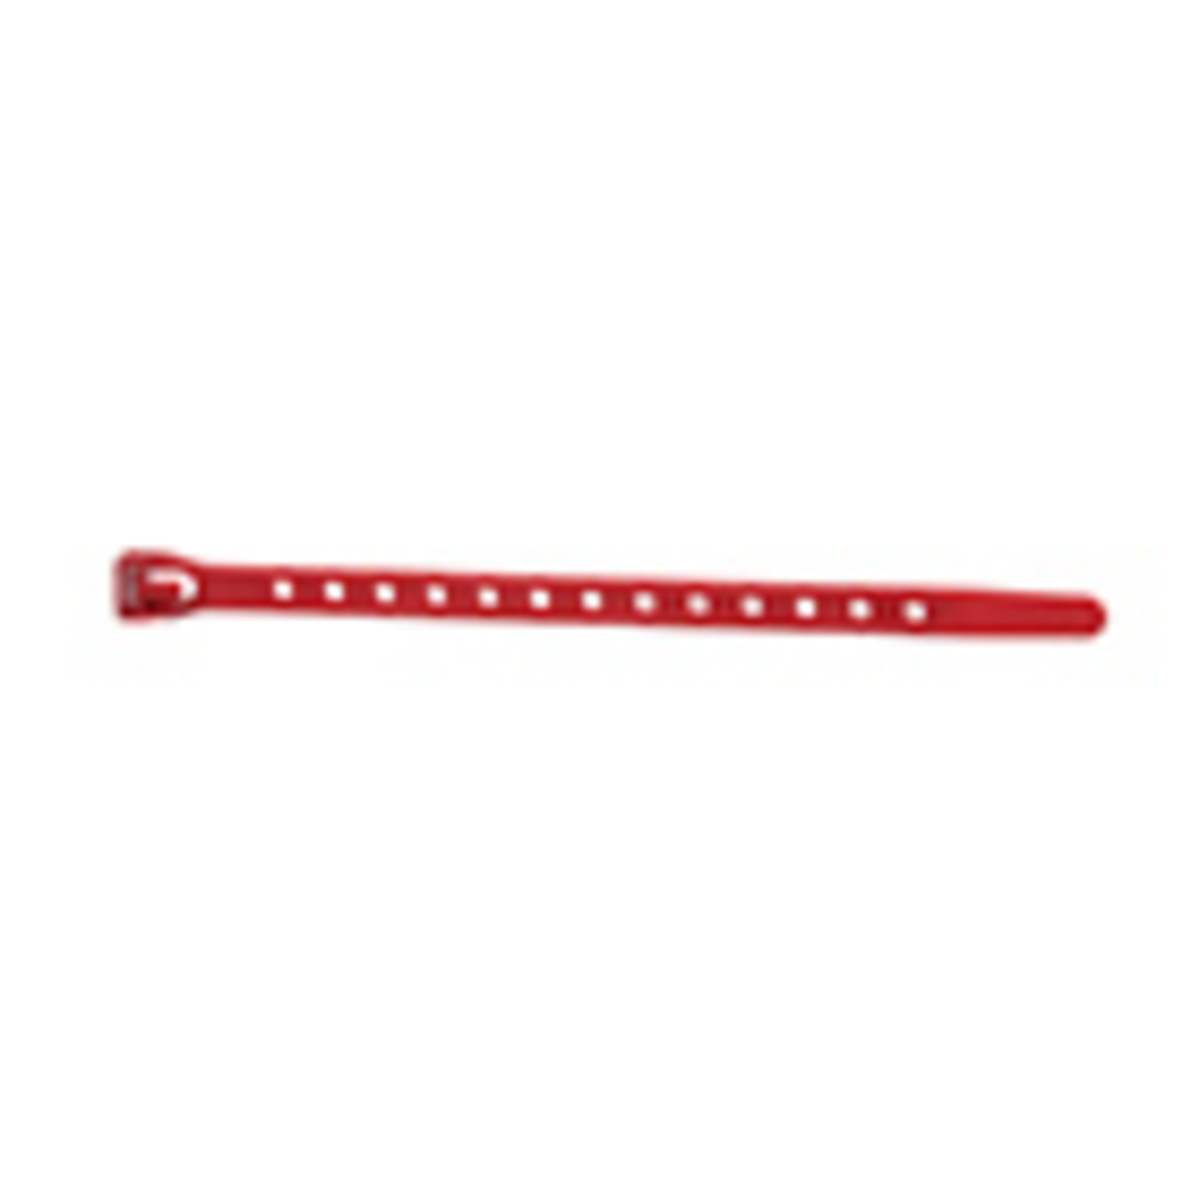 CABLE TIE, UNIVERSAL MOUNTING, RELEASABLE, RED, 50LBS, 14", 100PK